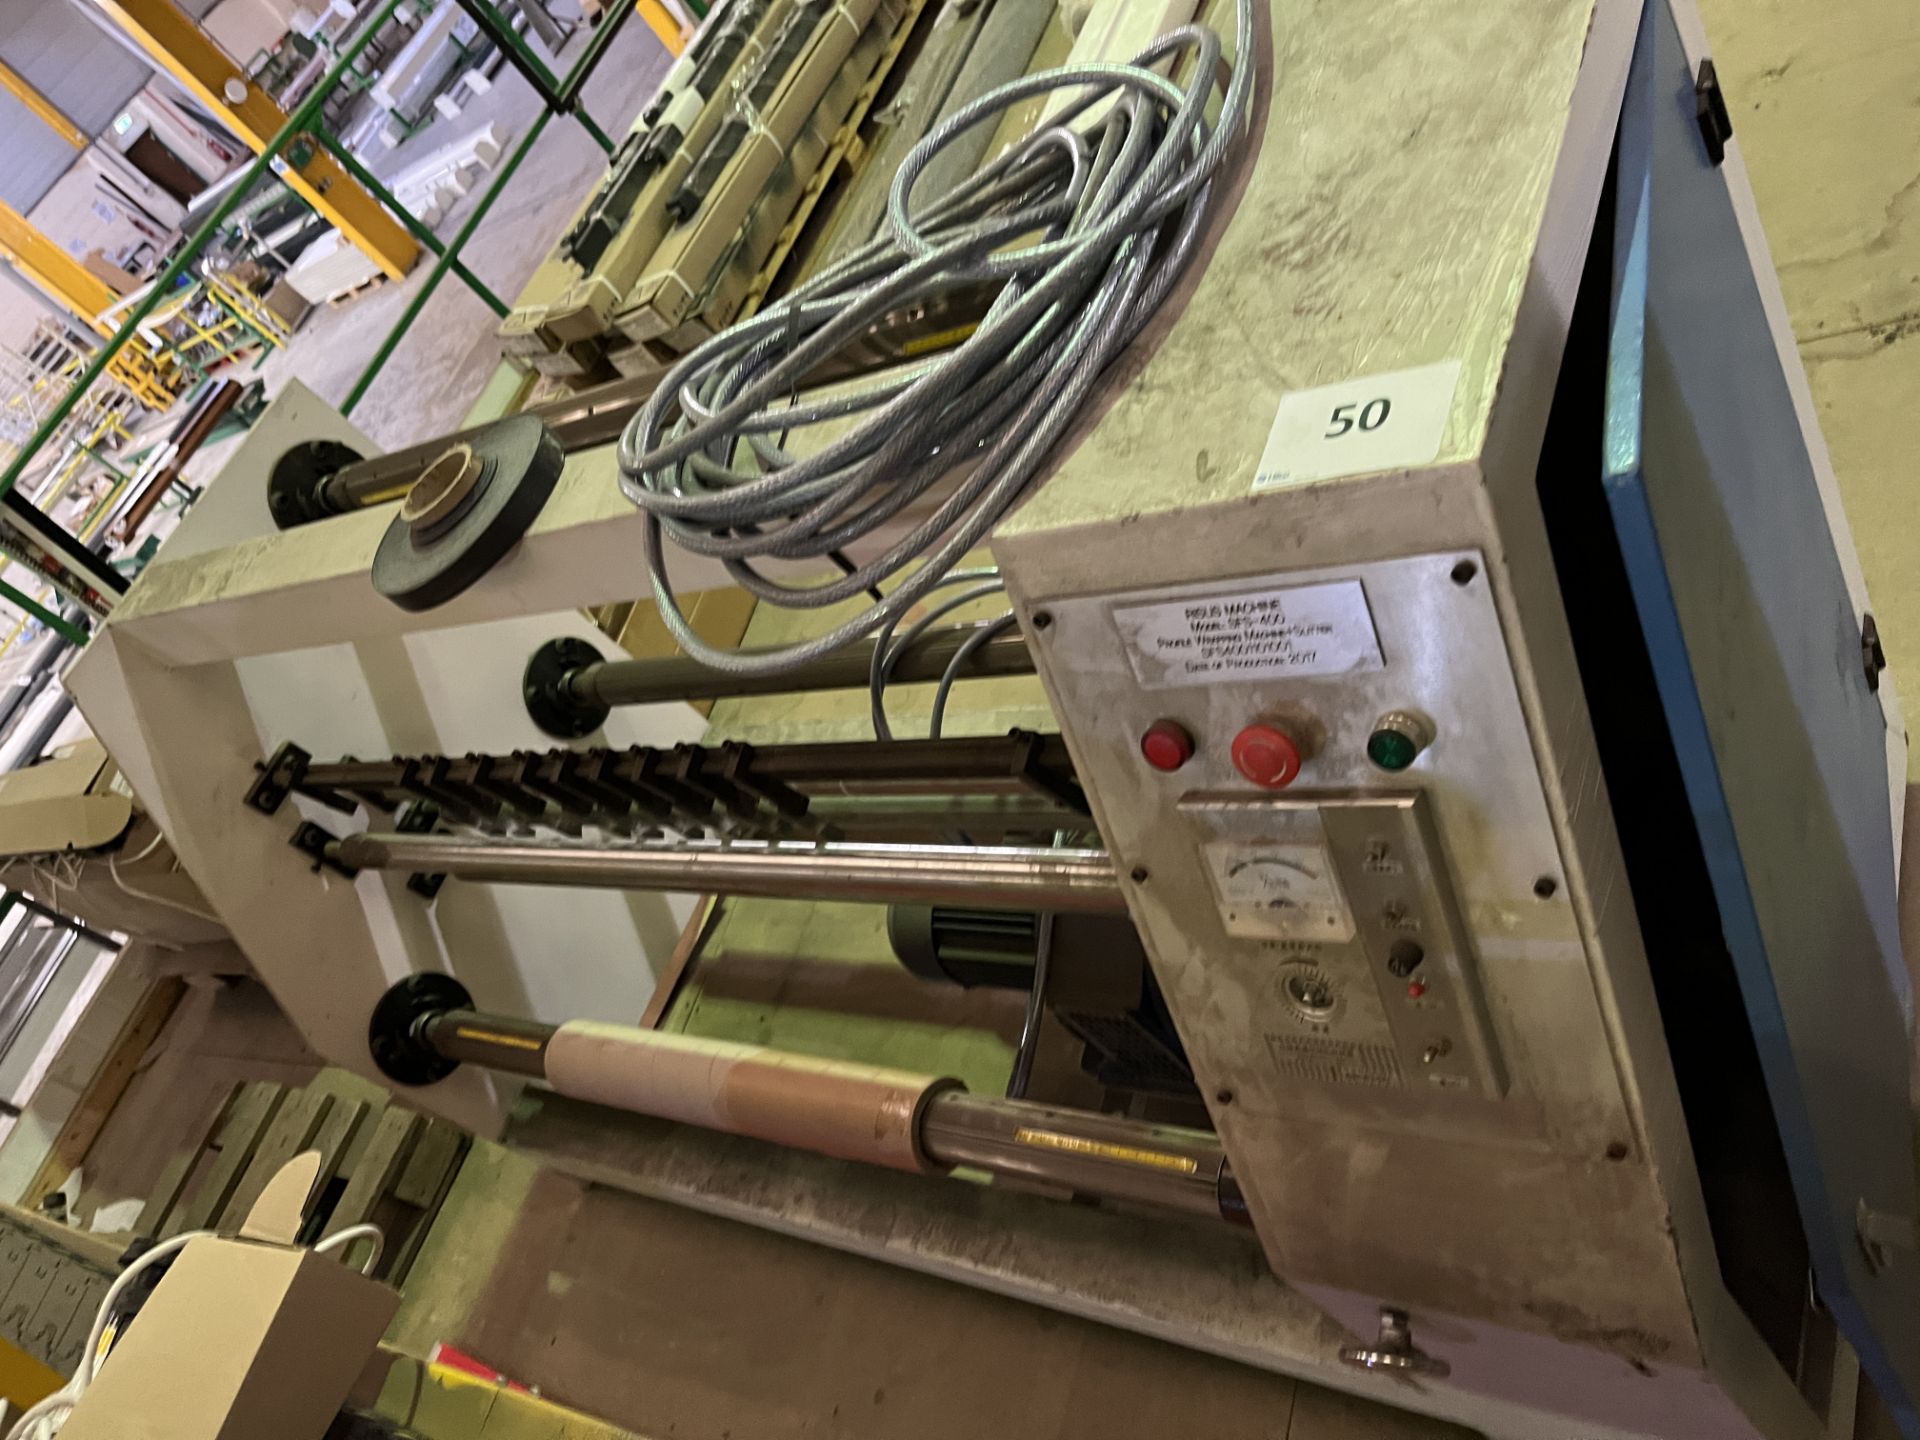 Risus SFS-400 Profile Wrapping Machine and Slitter